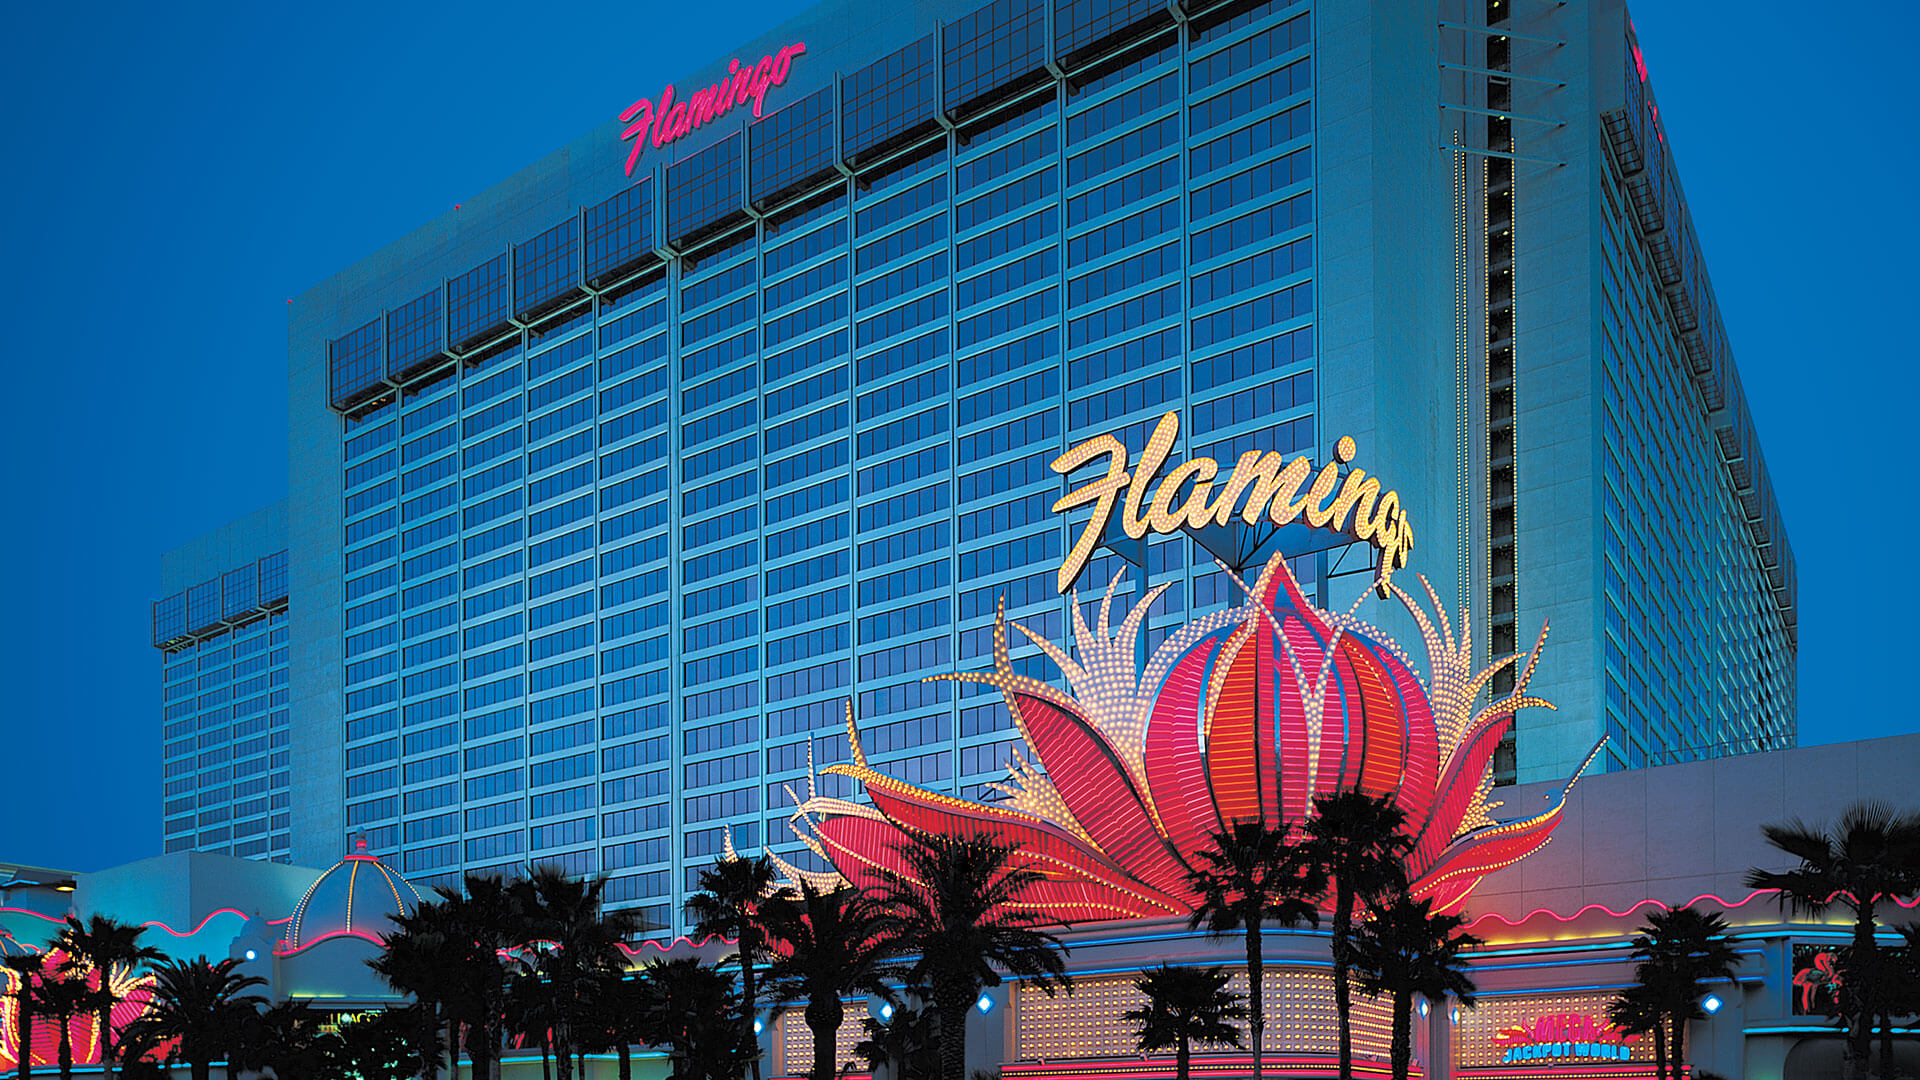 Flamingo Las Vegas Hotel & Casino Review: What To REALLY Expect If You Stay